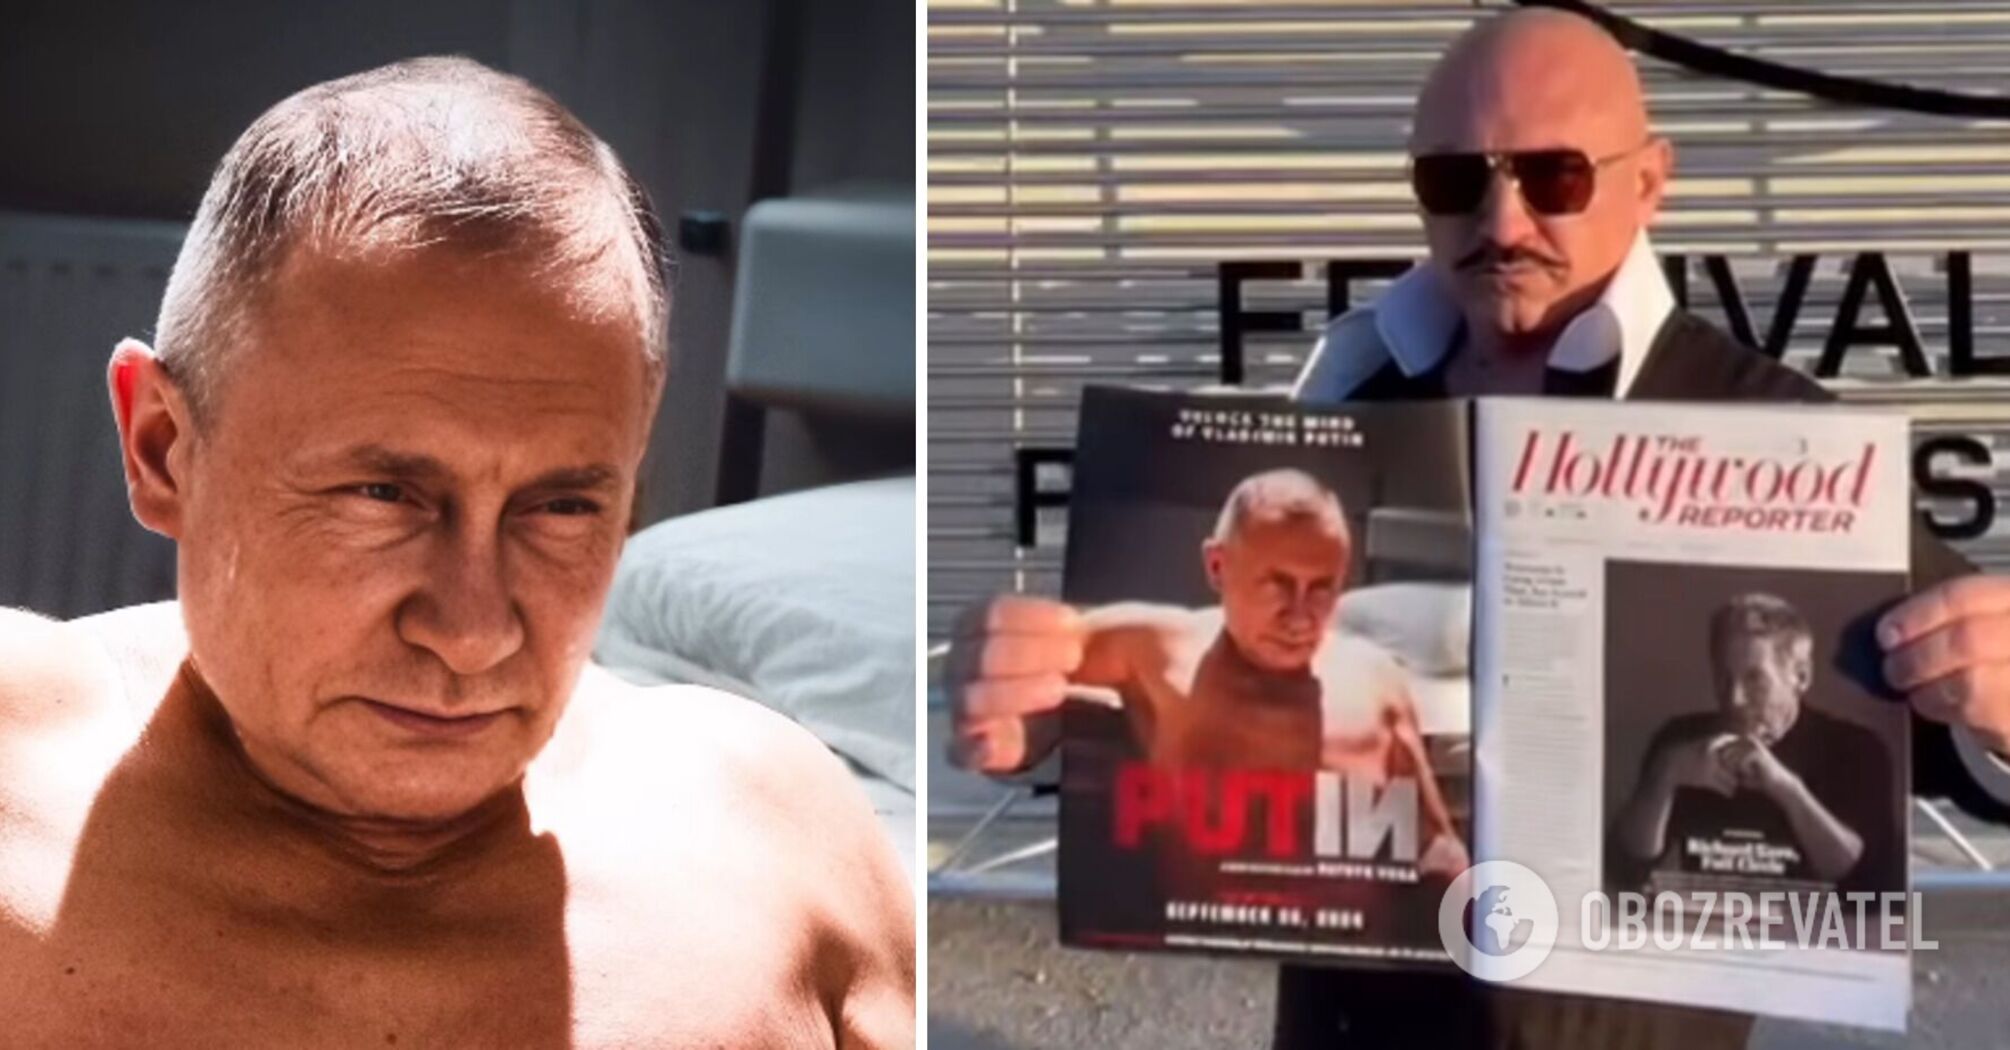 A movie with a happy ending about Russian dictator Putin was shown in Cannes: he dies in the finale